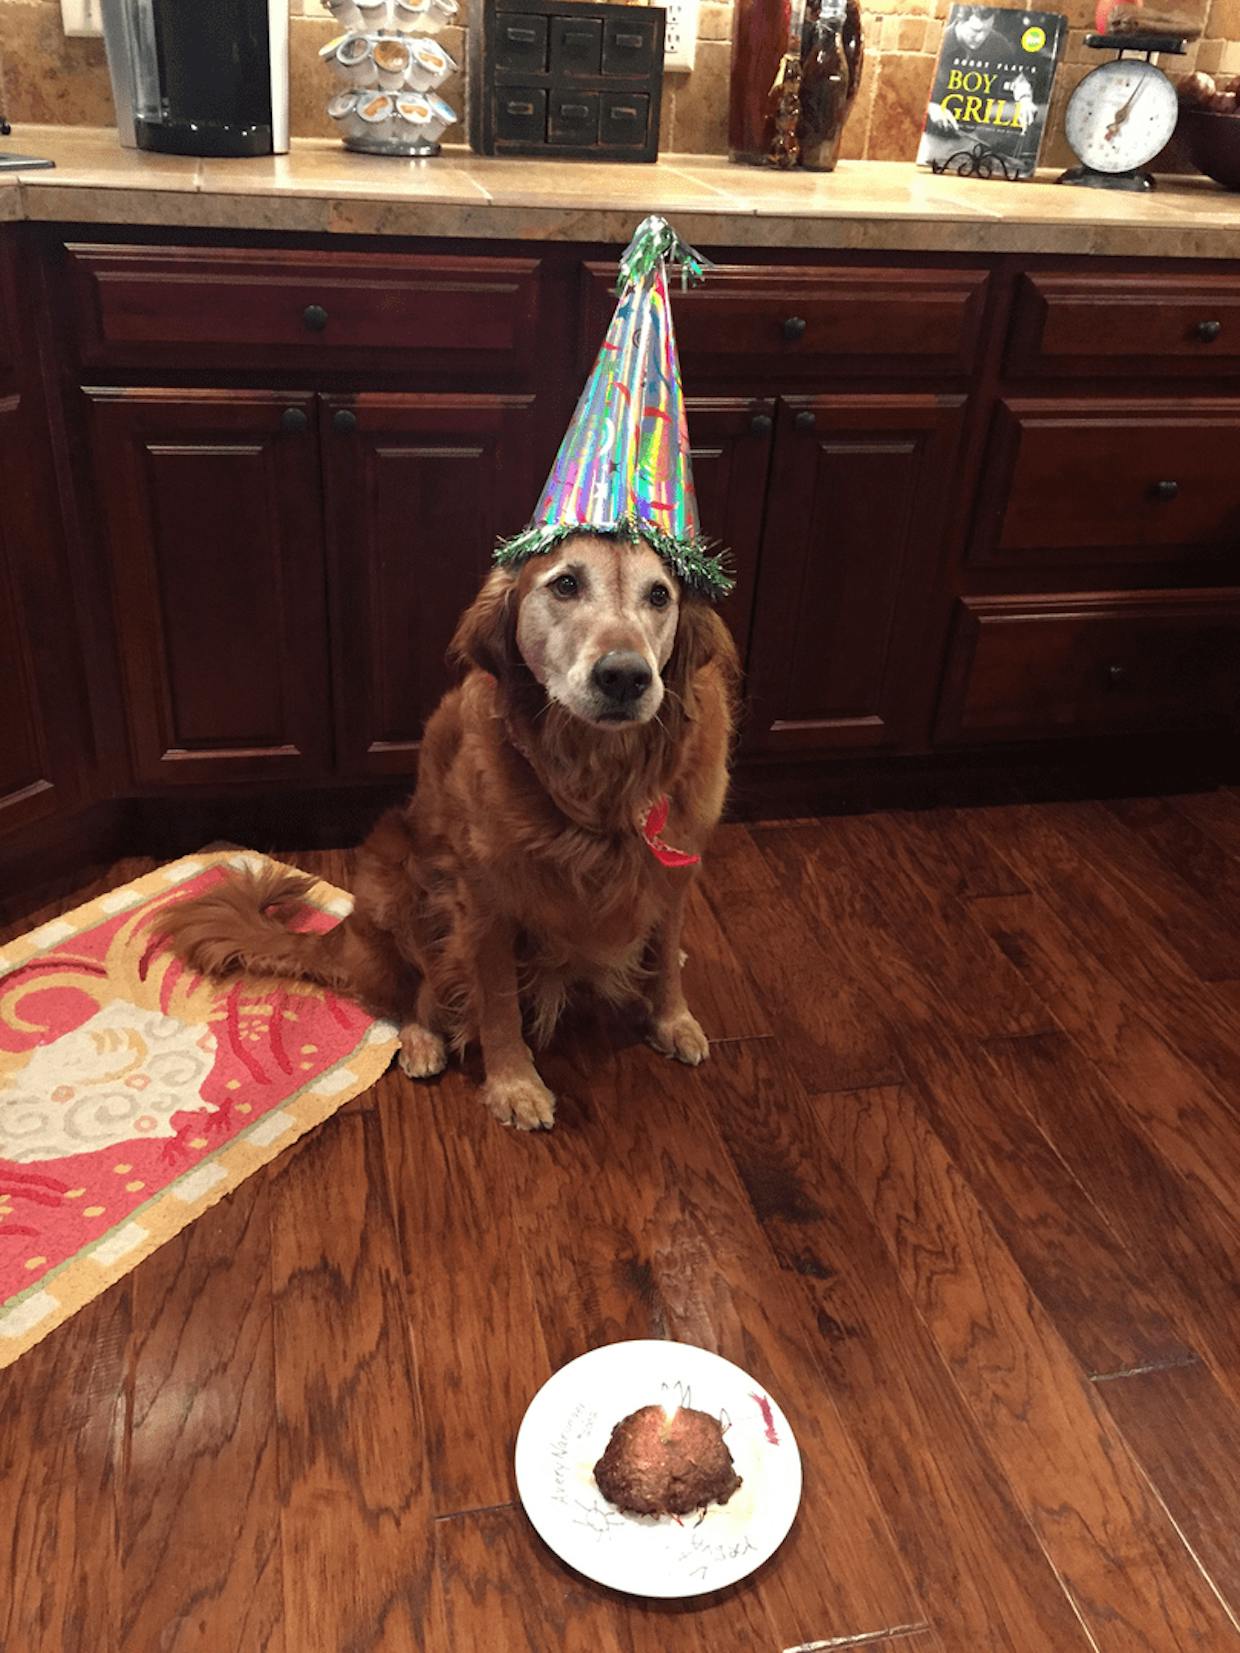 Montrose local Linda Narlinger submitted this adorable photo of her birthday pup last month!